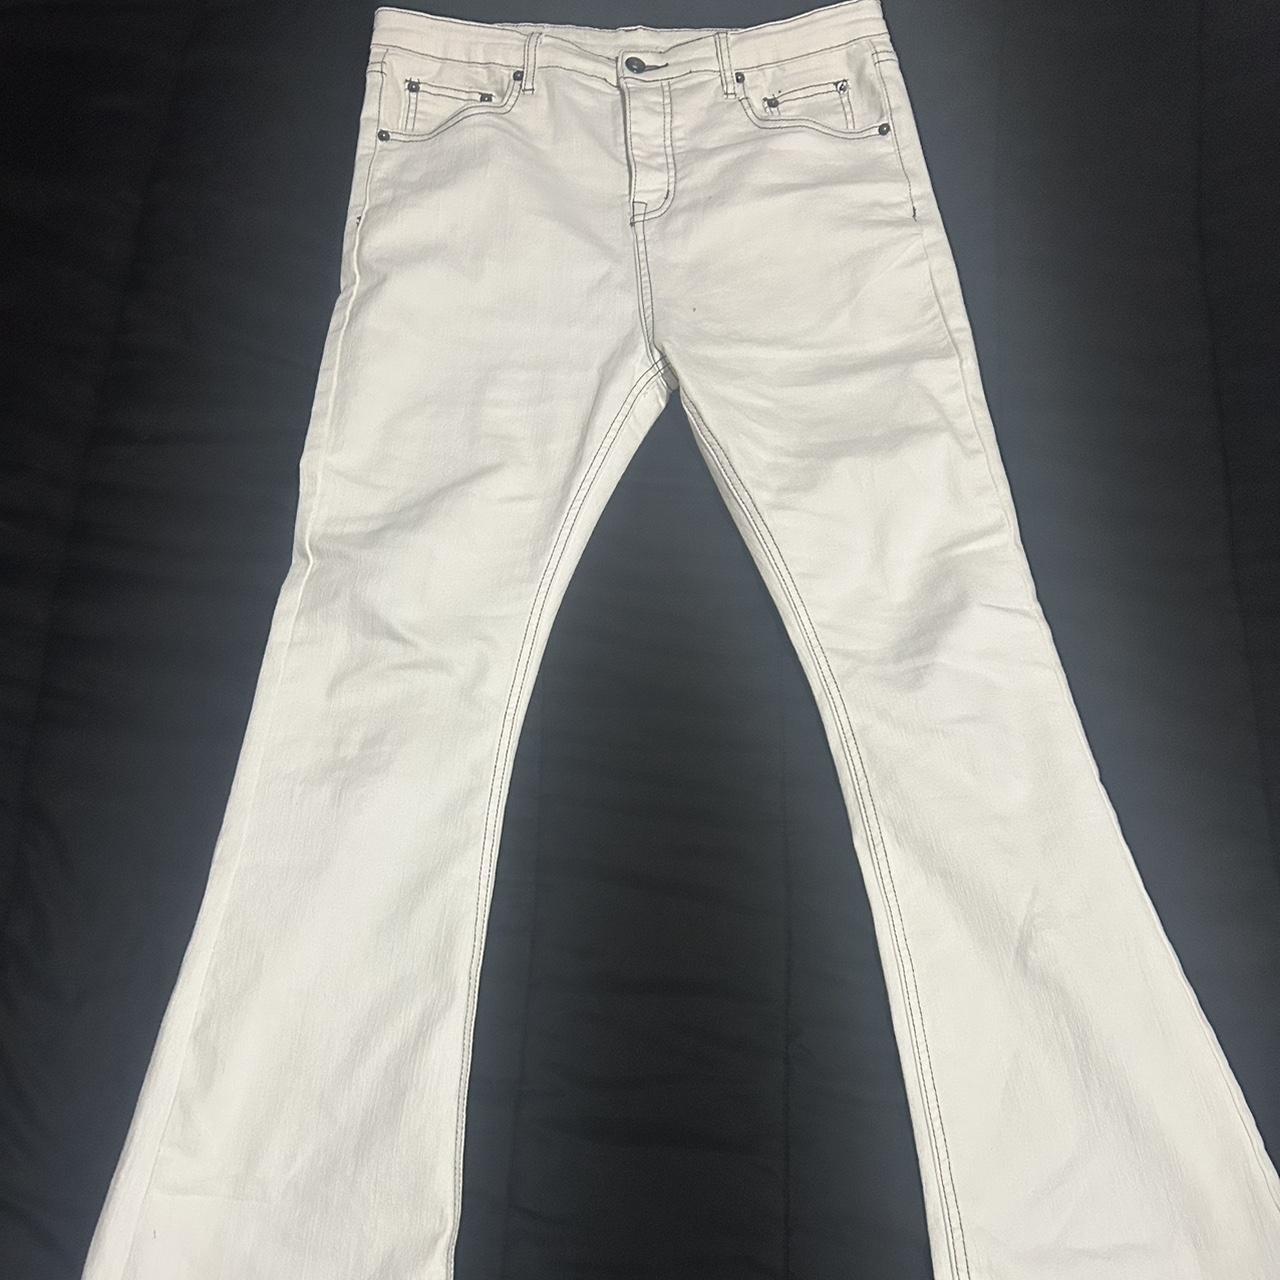 Rick owens style bolan flared Jeans unbranded - Depop